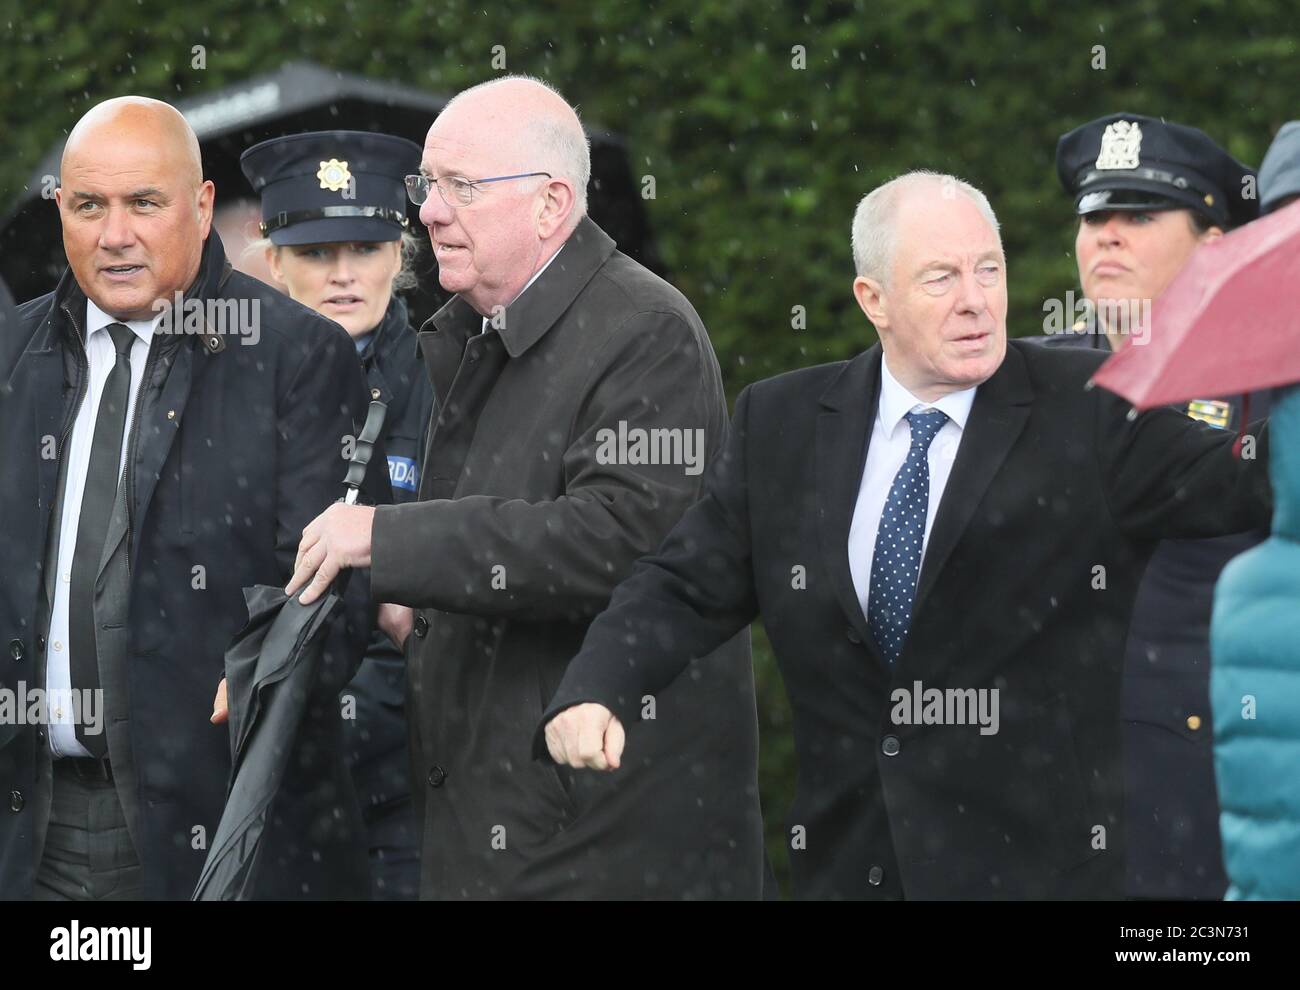 minister-for-justice-charles-flanagan-centre-and-minister-for-rural-community-development-michael-ring-right-at-the-funeral-of-detective-garda-colm-horkan-at-st-james-church-in-charlestown-co-mayo-2C3N731.jpg